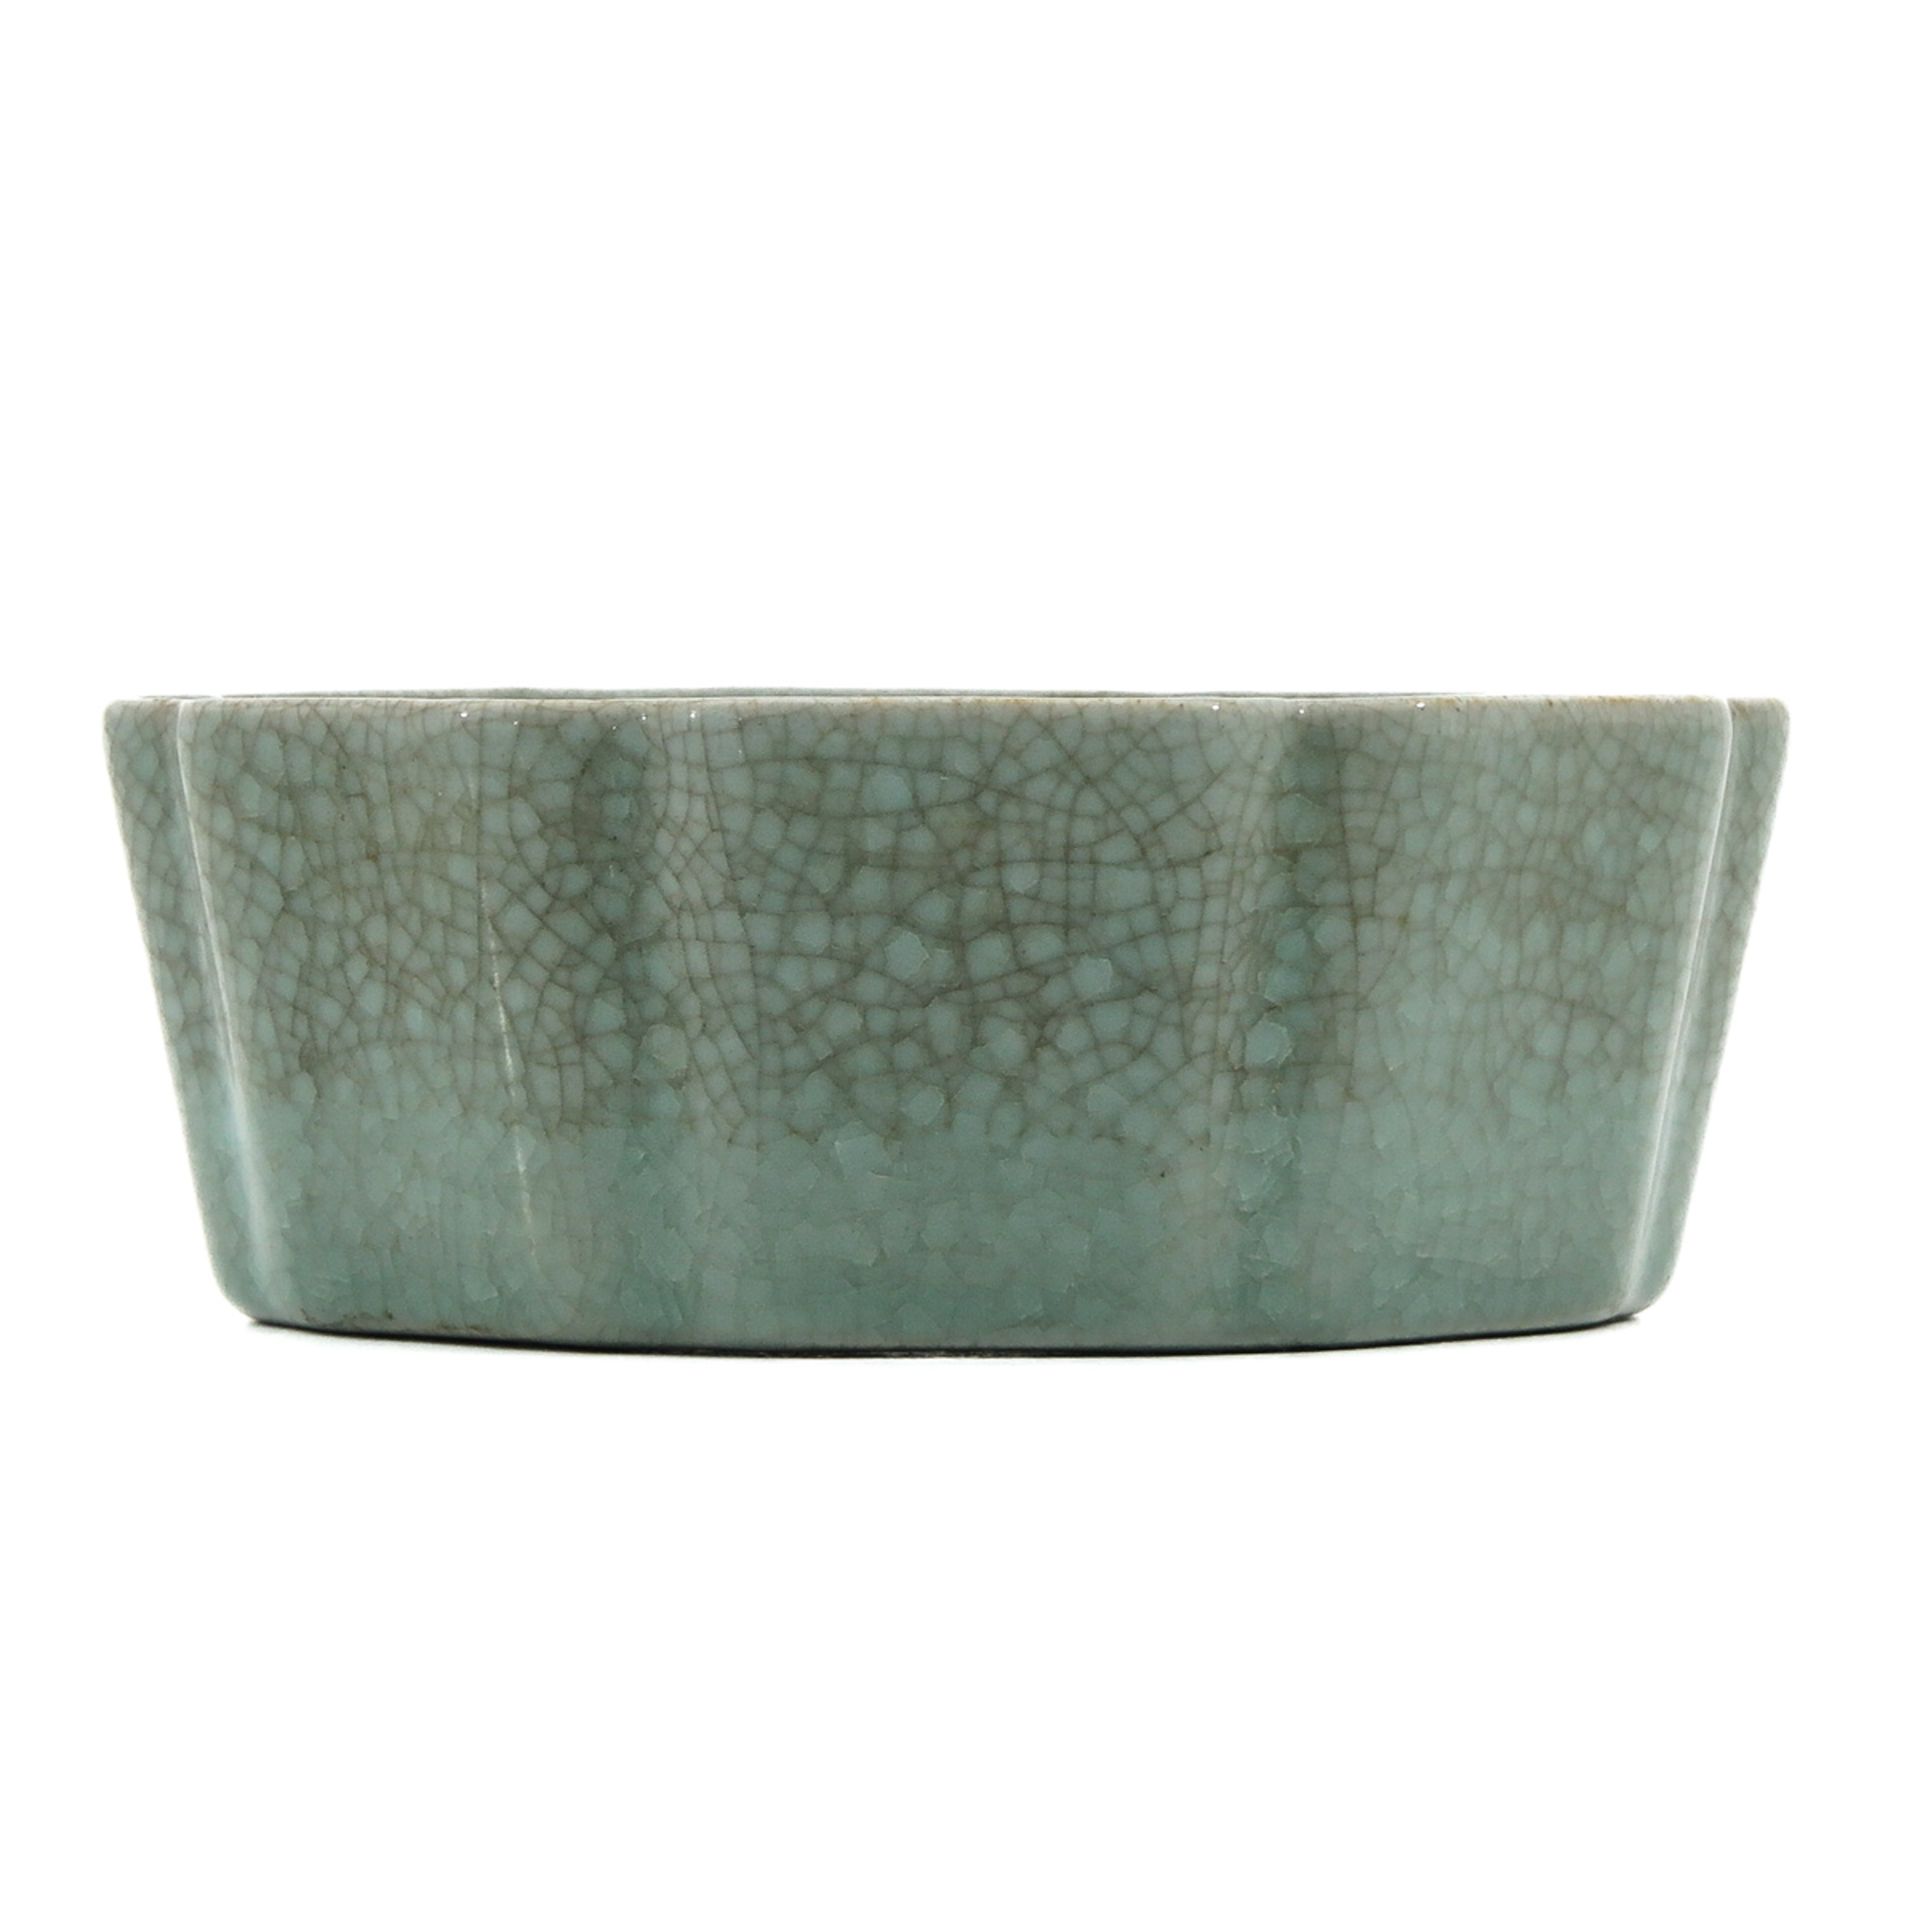 A Collection of Celadon - Image 2 of 10